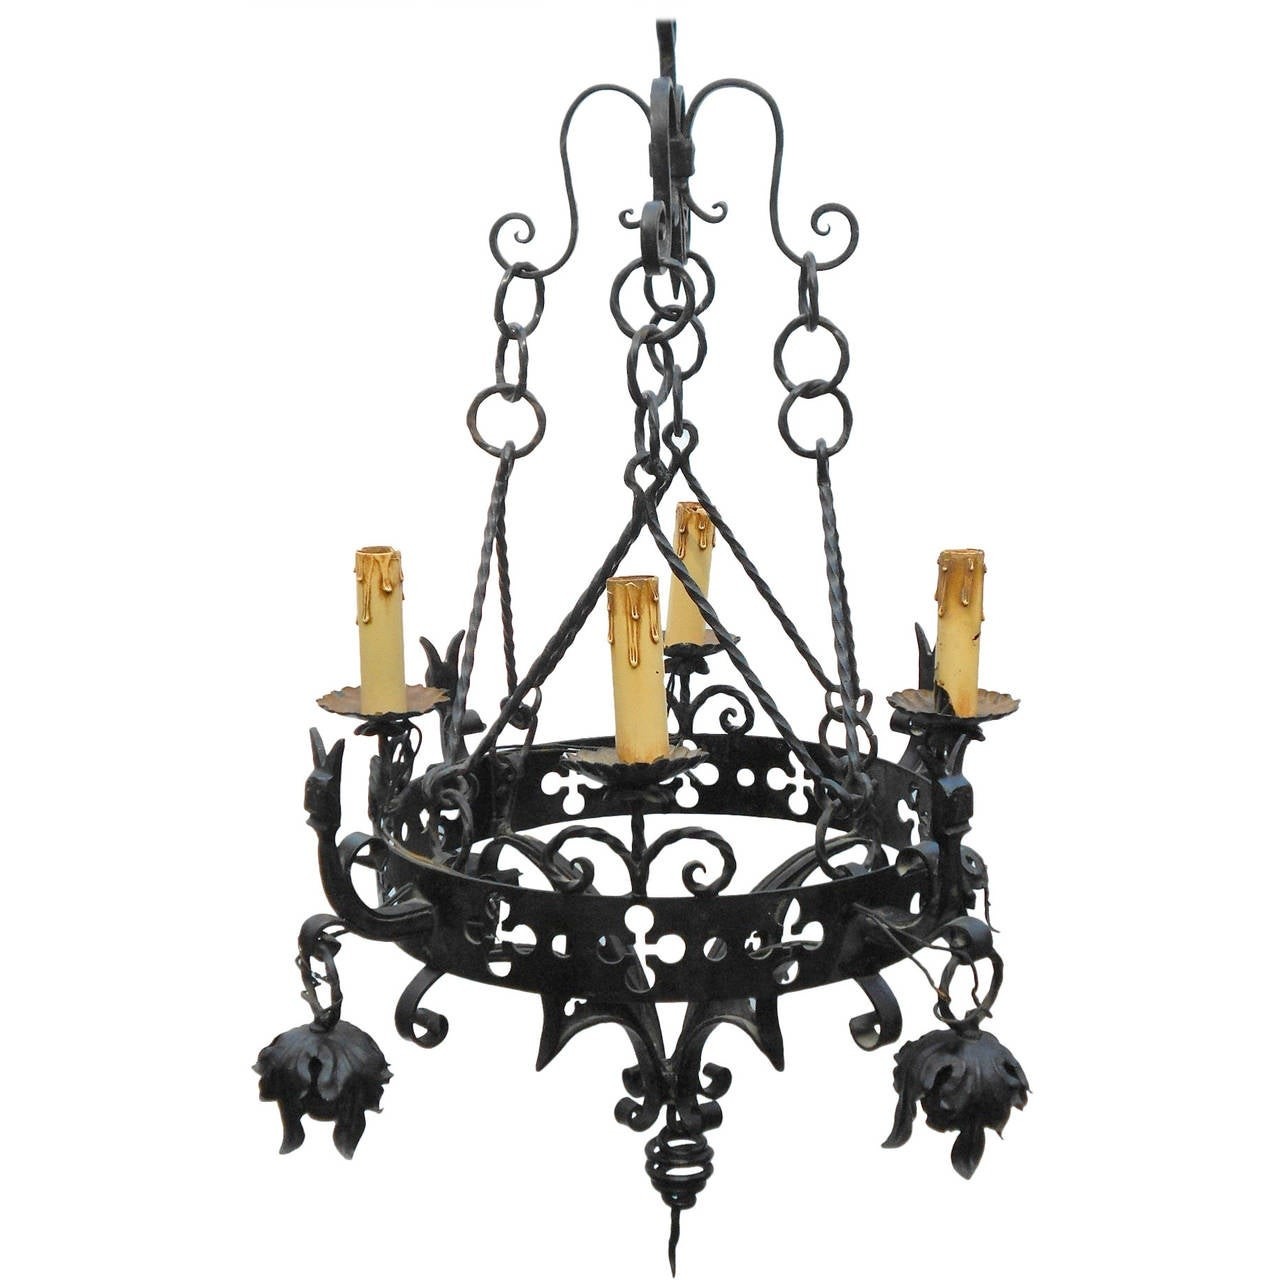 Gothic iron chandelier with horned faces for sale at 1stdibs